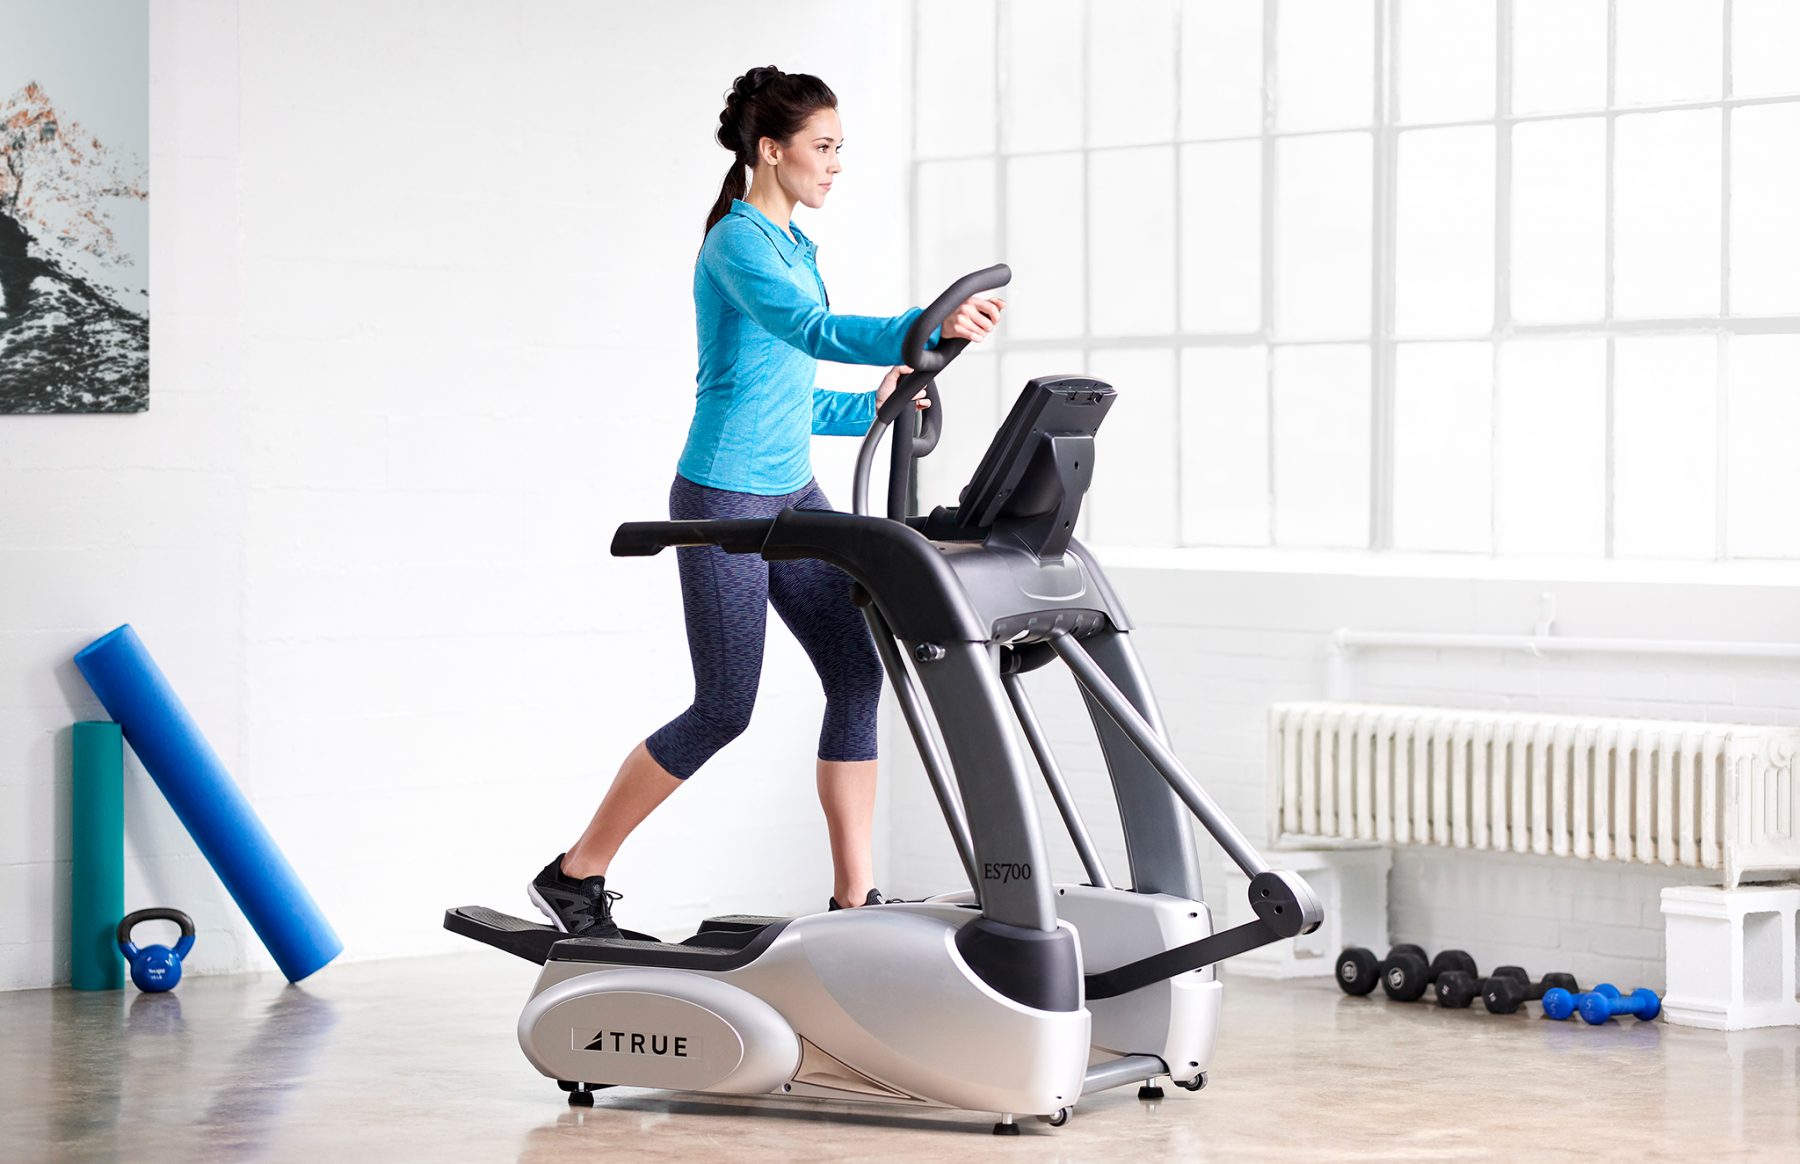 Ellipticals For Home from TRUE Fitness.